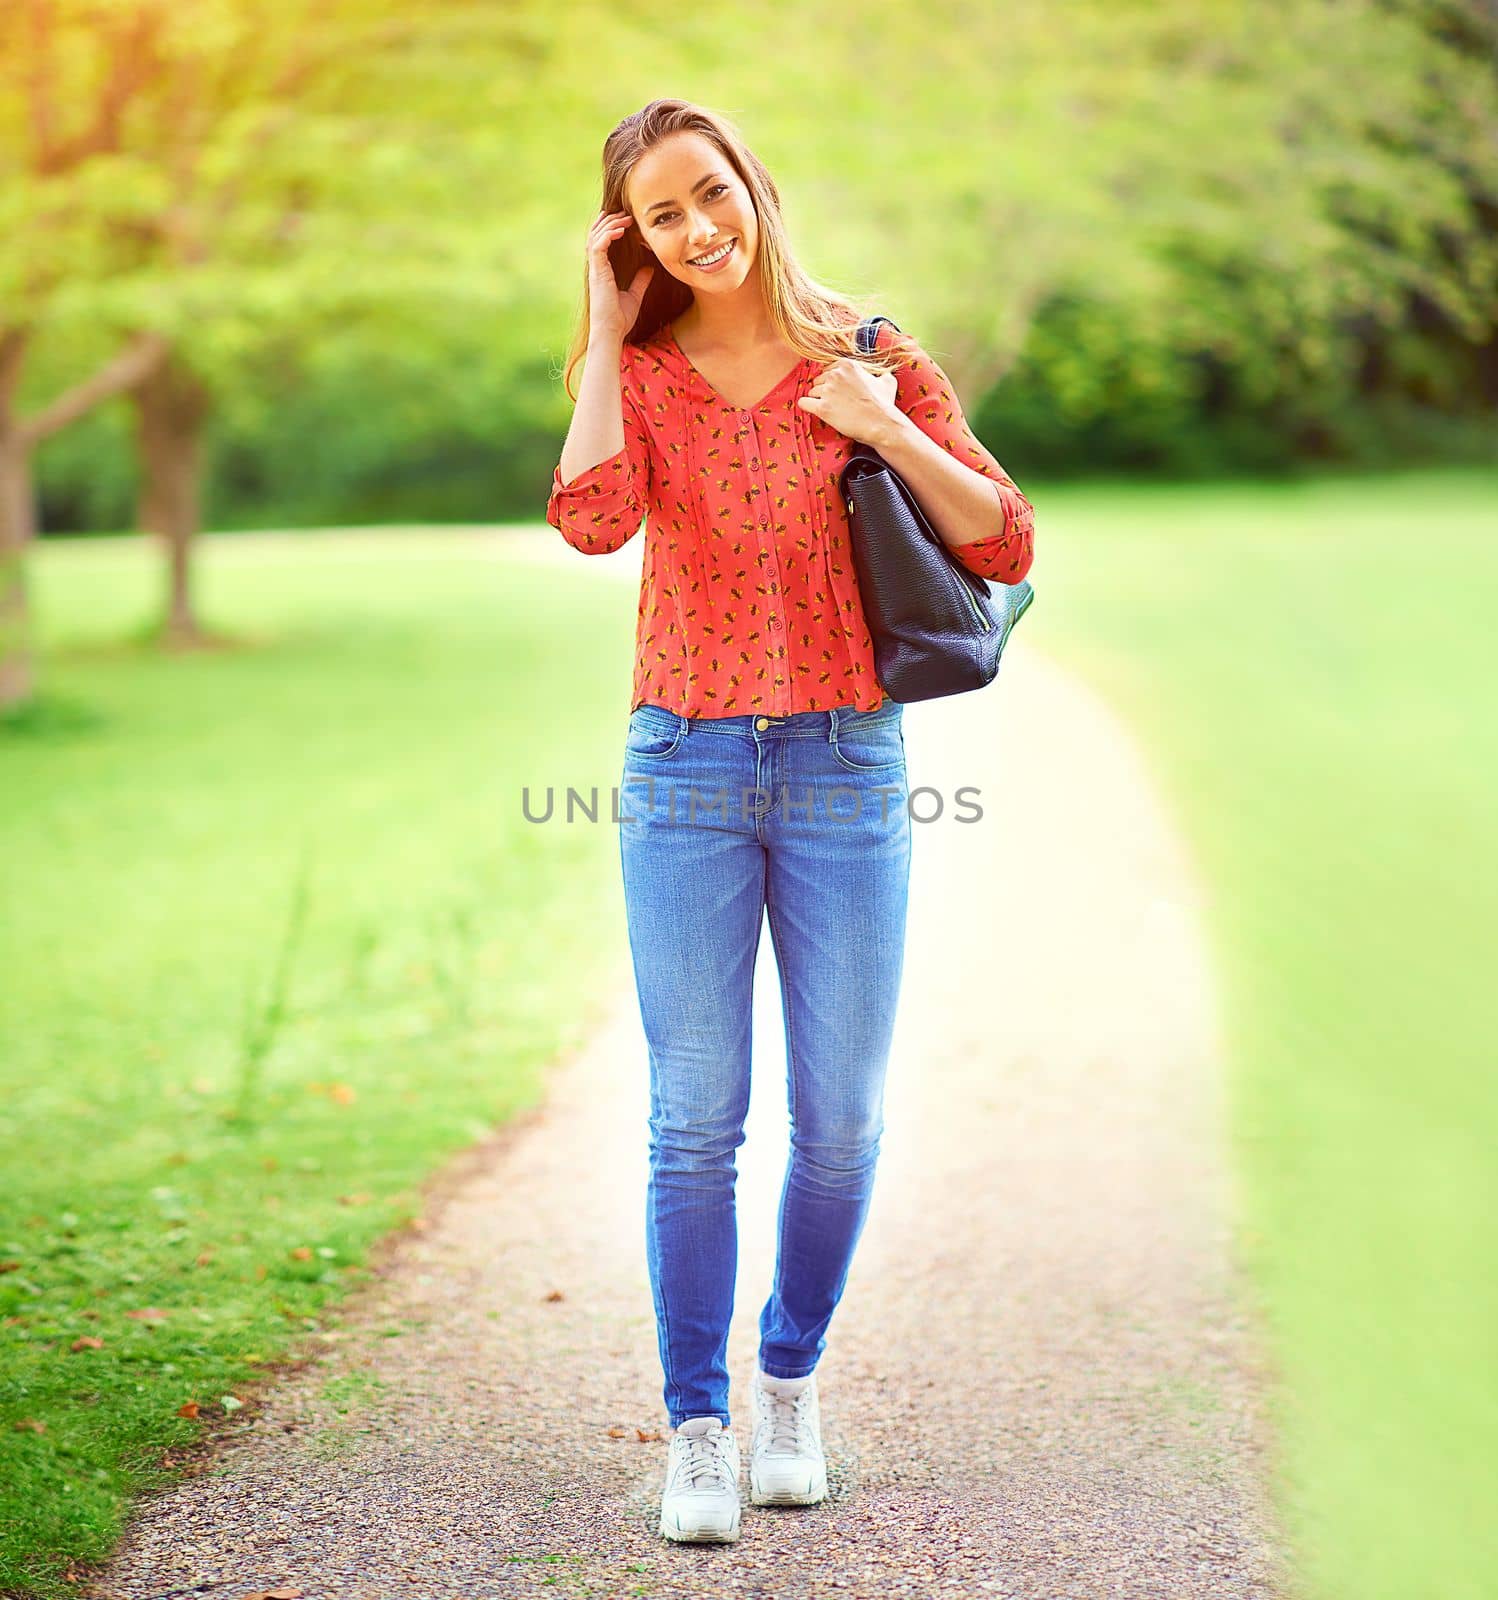 Being in the outdoors always puts a smile on my face. a young woman on a walk through the park